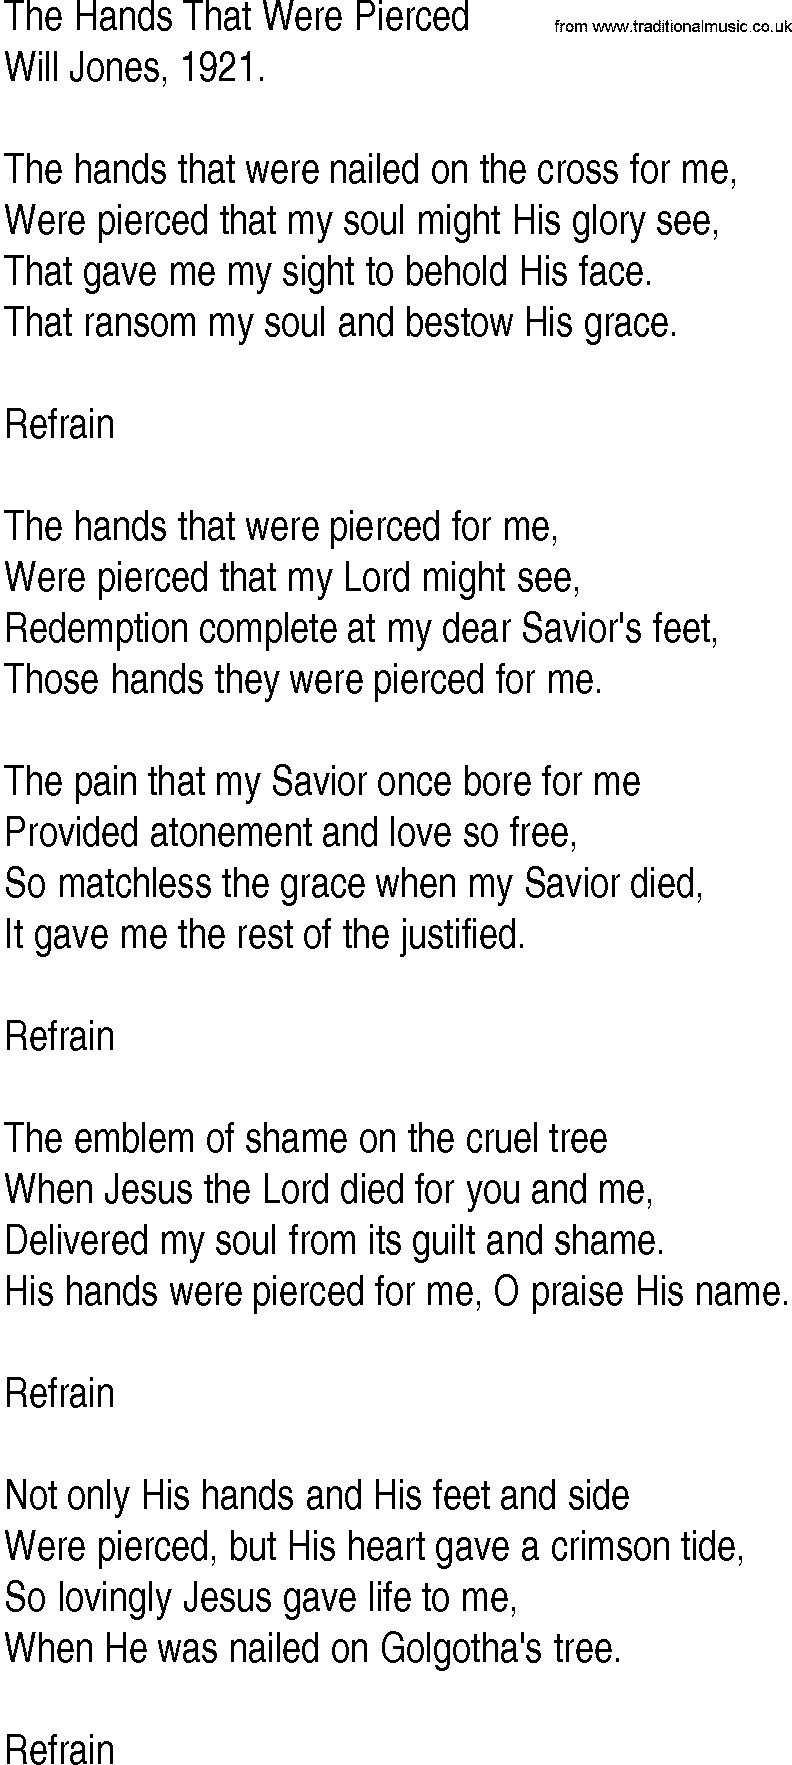 Hymn and Gospel Song: The Hands That Were Pierced by Will Jones lyrics